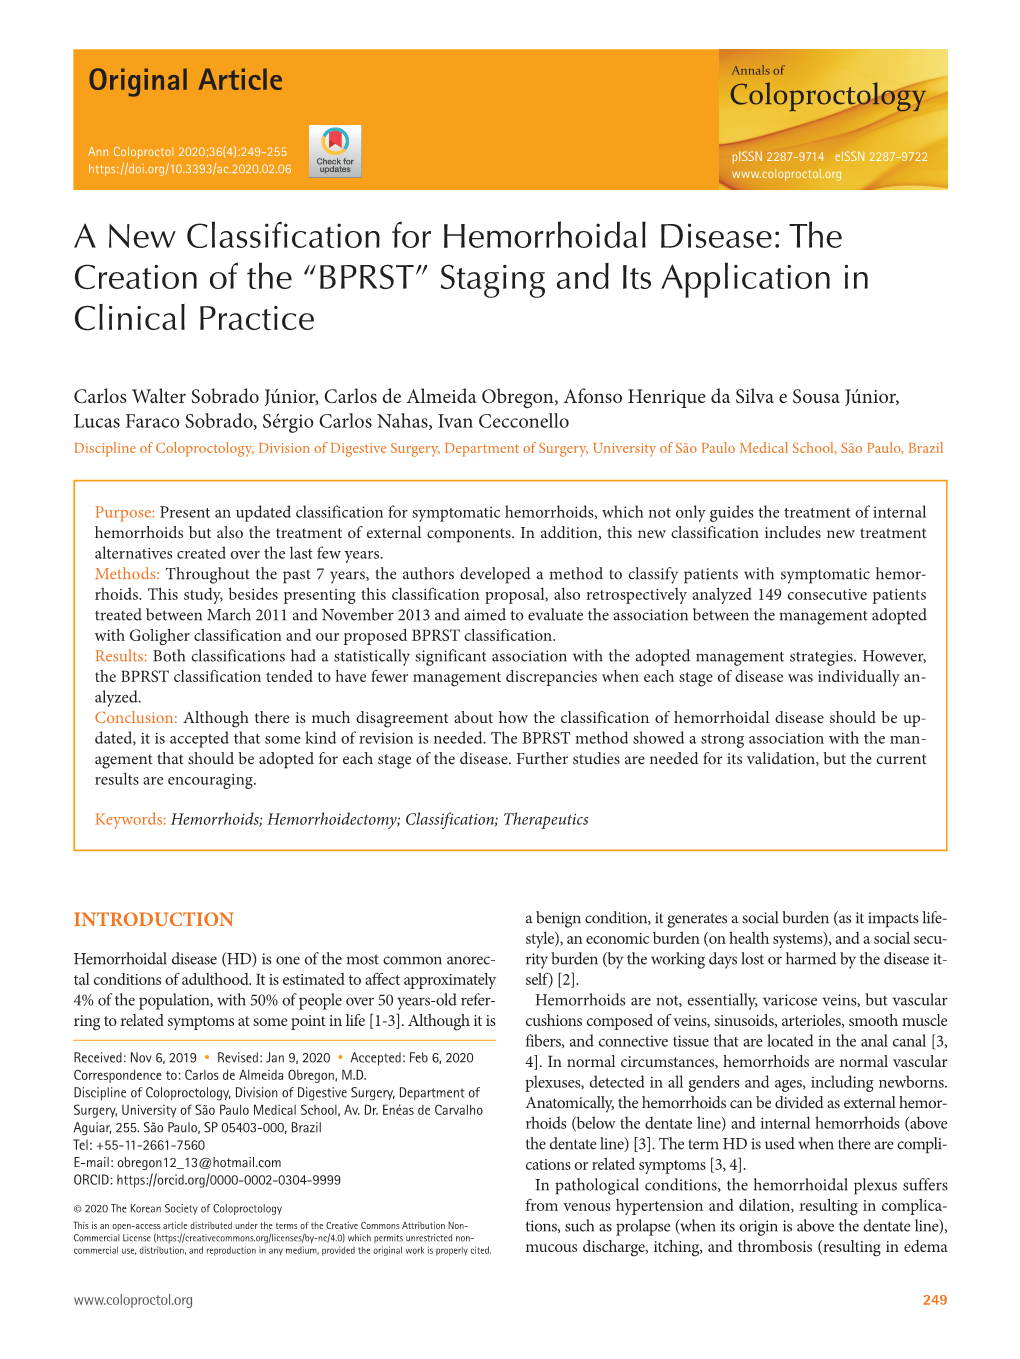 A New Classification for Hemorrhoidal Disease: the Creation of the “BPRST” Staging and Its Application in Clinical Practice